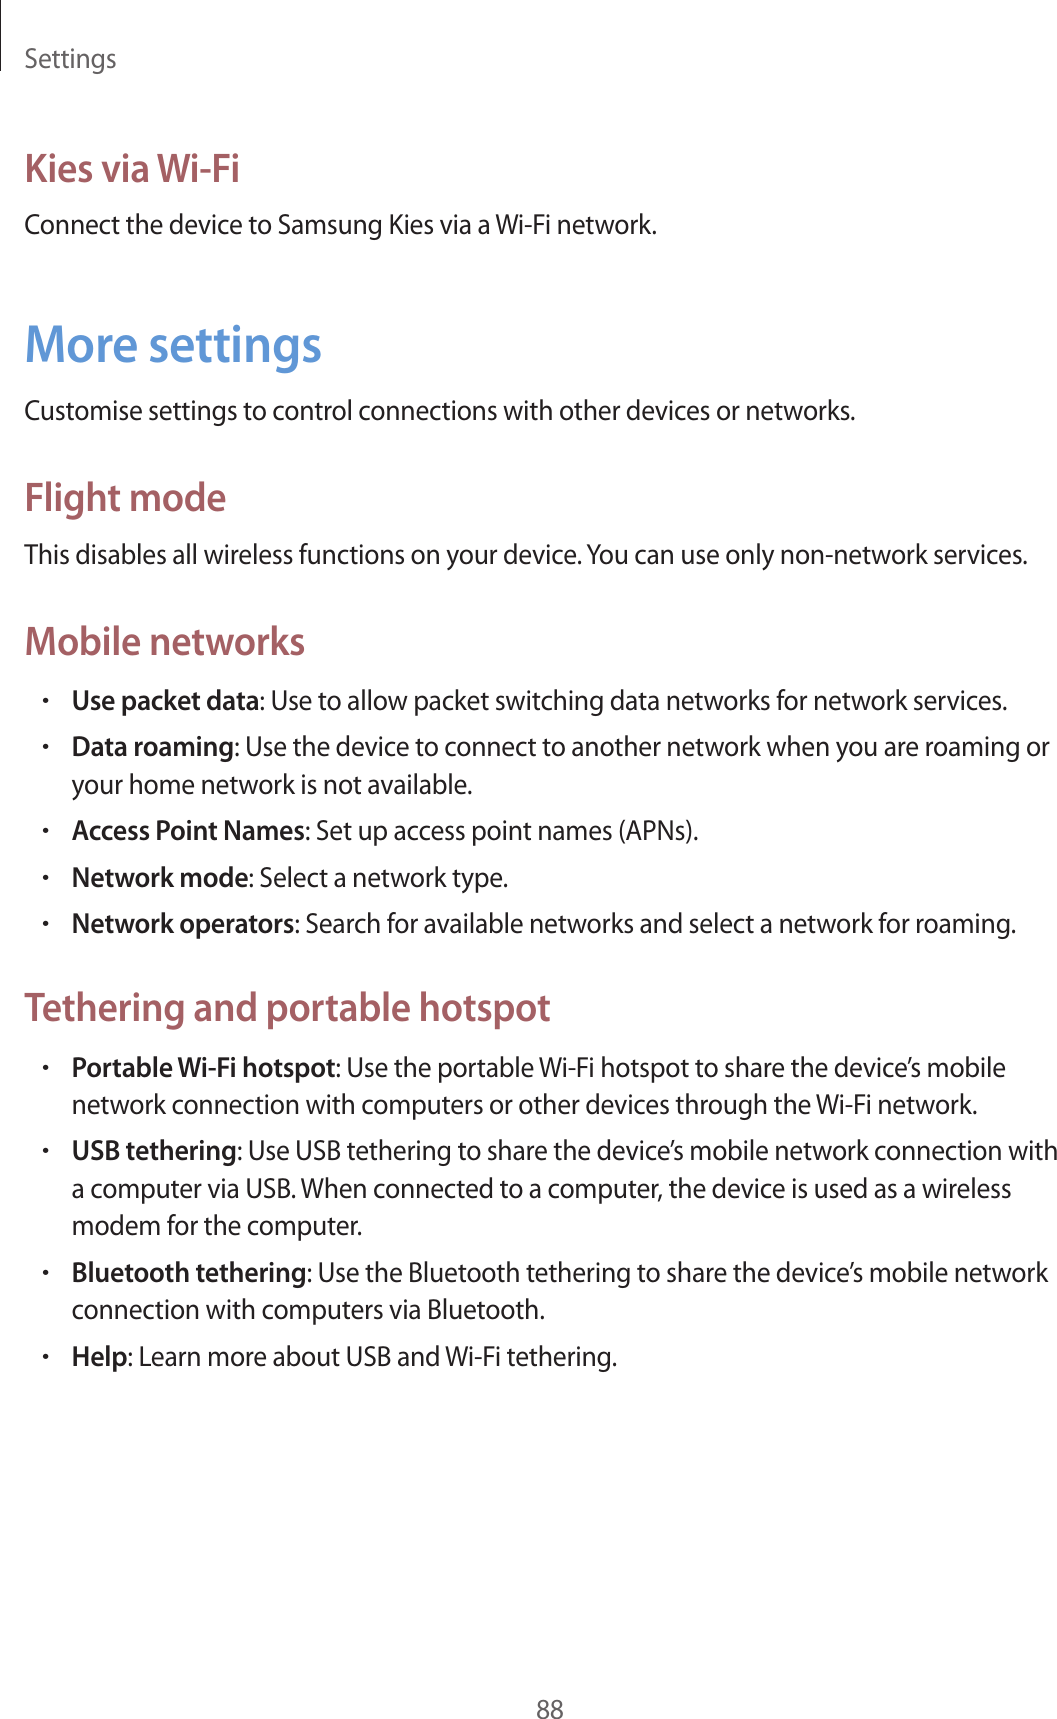 Settings88Kies via Wi-FiConnect the device to Samsung Kies via a Wi-Fi network.More settingsCustomise settings to control connections with other devices or networks.Flight modeThis disables all wireless functions on your device. You can use only non-network services.Mobile networks•Use packet data: Use to allow packet switching data networks for network services.•Data roaming: Use the device to connect to another network when you are roaming or your home network is not available.•Access Point Names: Set up access point names (APNs).•Network mode: Select a network type.•Network operators: Search for available networks and select a network for roaming.Tethering and portable hotspot•Portable Wi-Fi hotspot: Use the portable Wi-Fi hotspot to share the device’s mobile network connection with computers or other devices through the Wi-Fi network.•USB tethering: Use USB tethering to share the device’s mobile network connection with a computer via USB. When connected to a computer, the device is used as a wireless modem for the computer.•Bluetooth tethering: Use the Bluetooth tethering to share the device’s mobile network connection with computers via Bluetooth.•Help: Learn more about USB and Wi-Fi tethering.